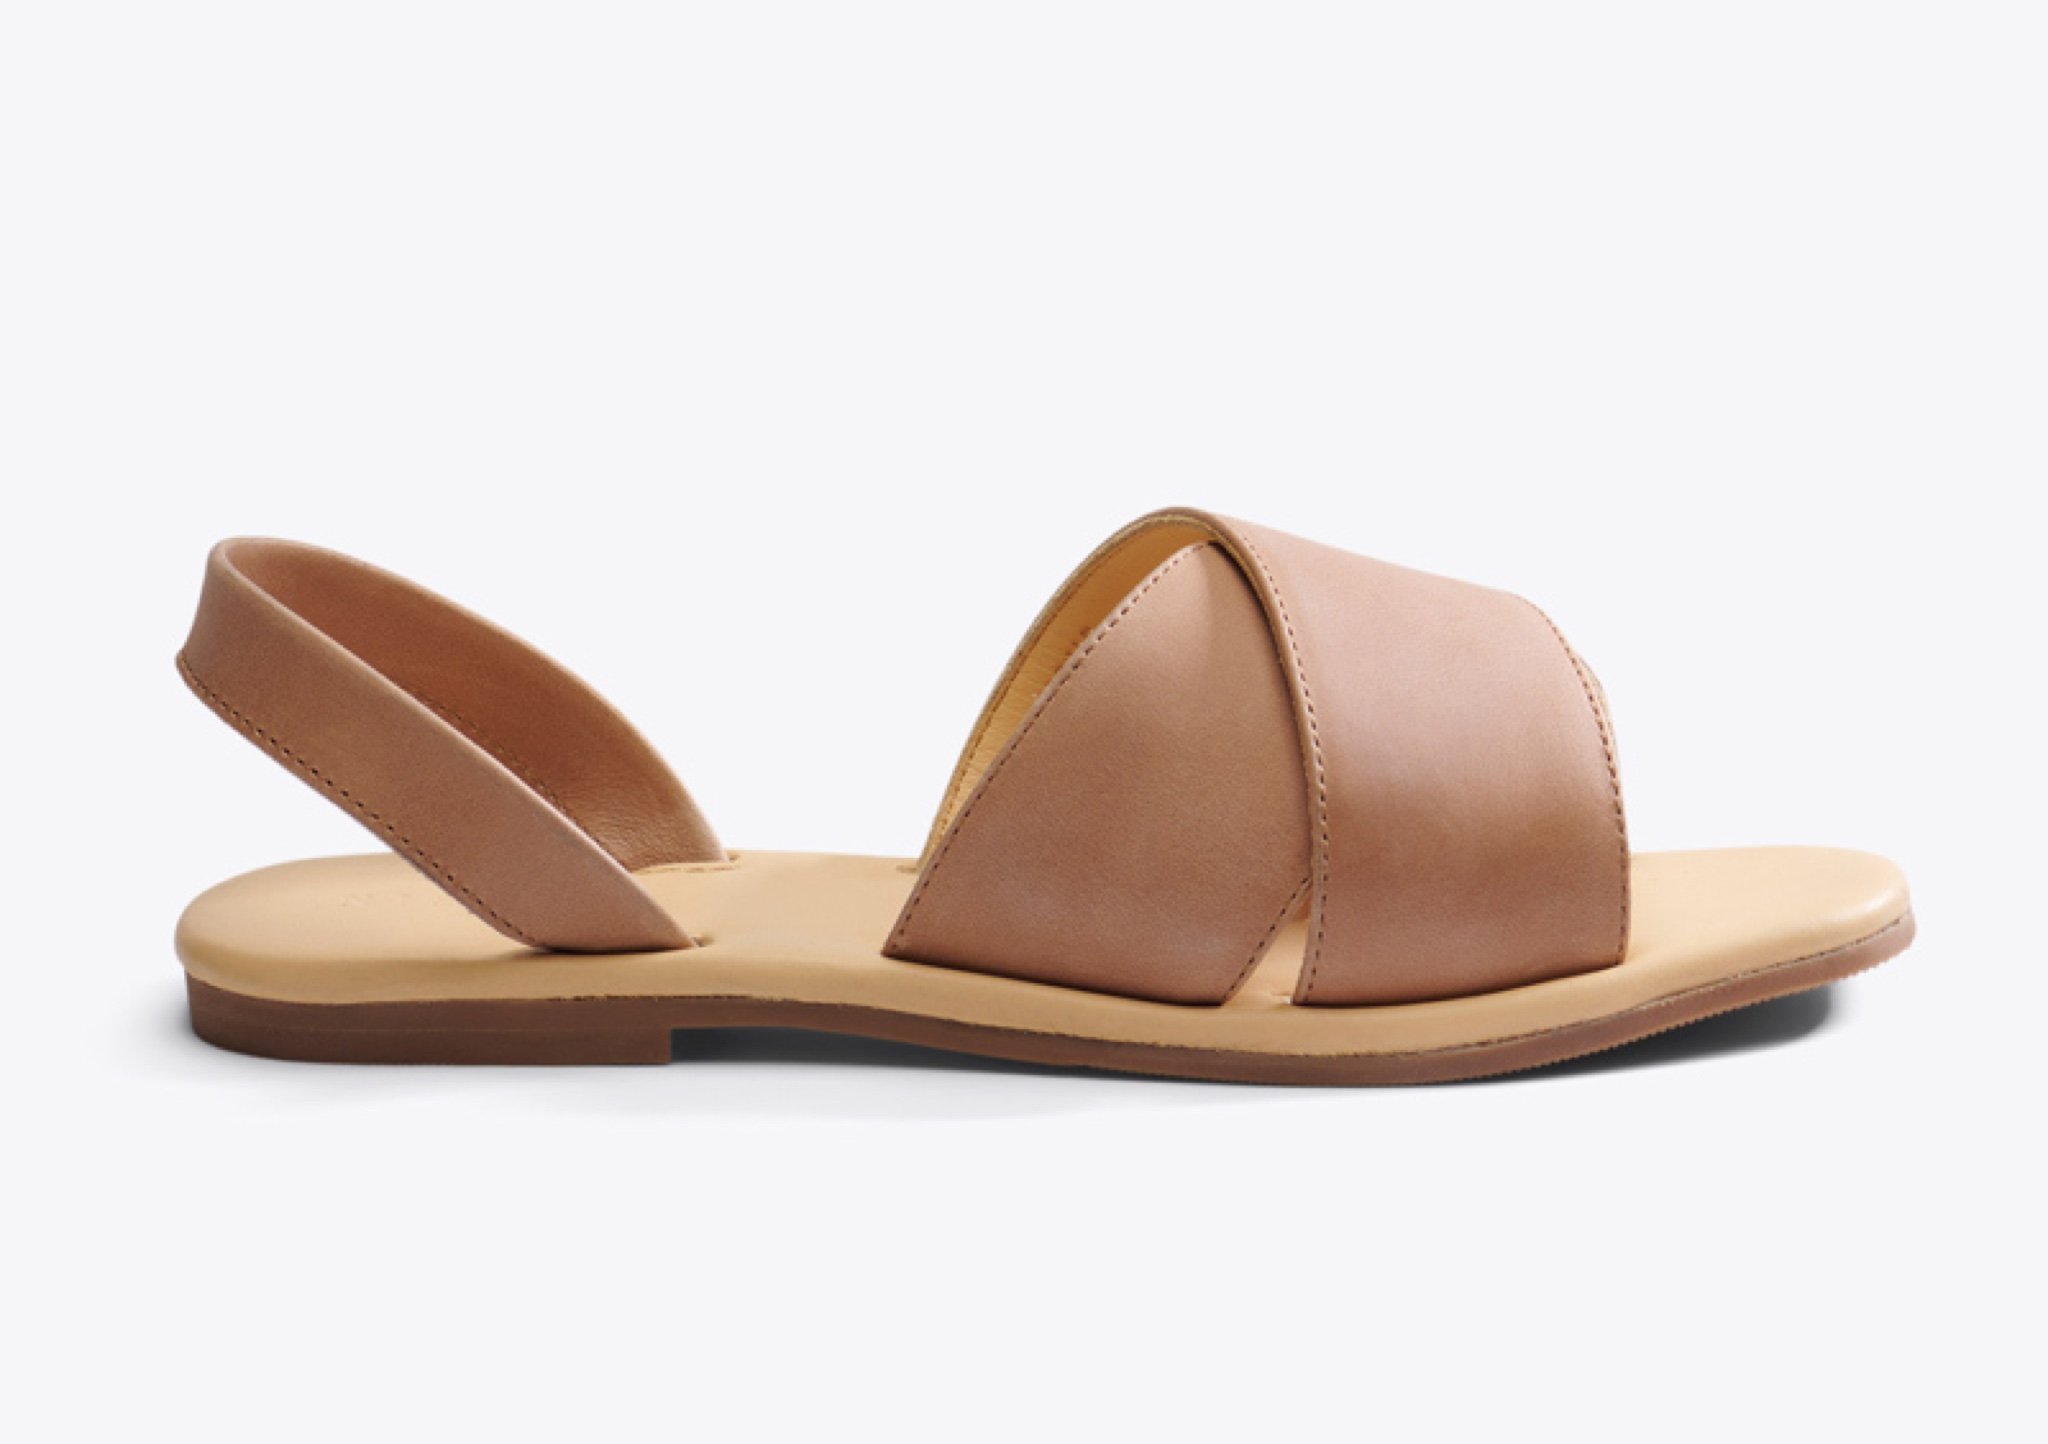 Nisolo All-Day Cross Strap Sandal Almond - Every Nisolo product is built on the foundation of comfort, function, and design. 